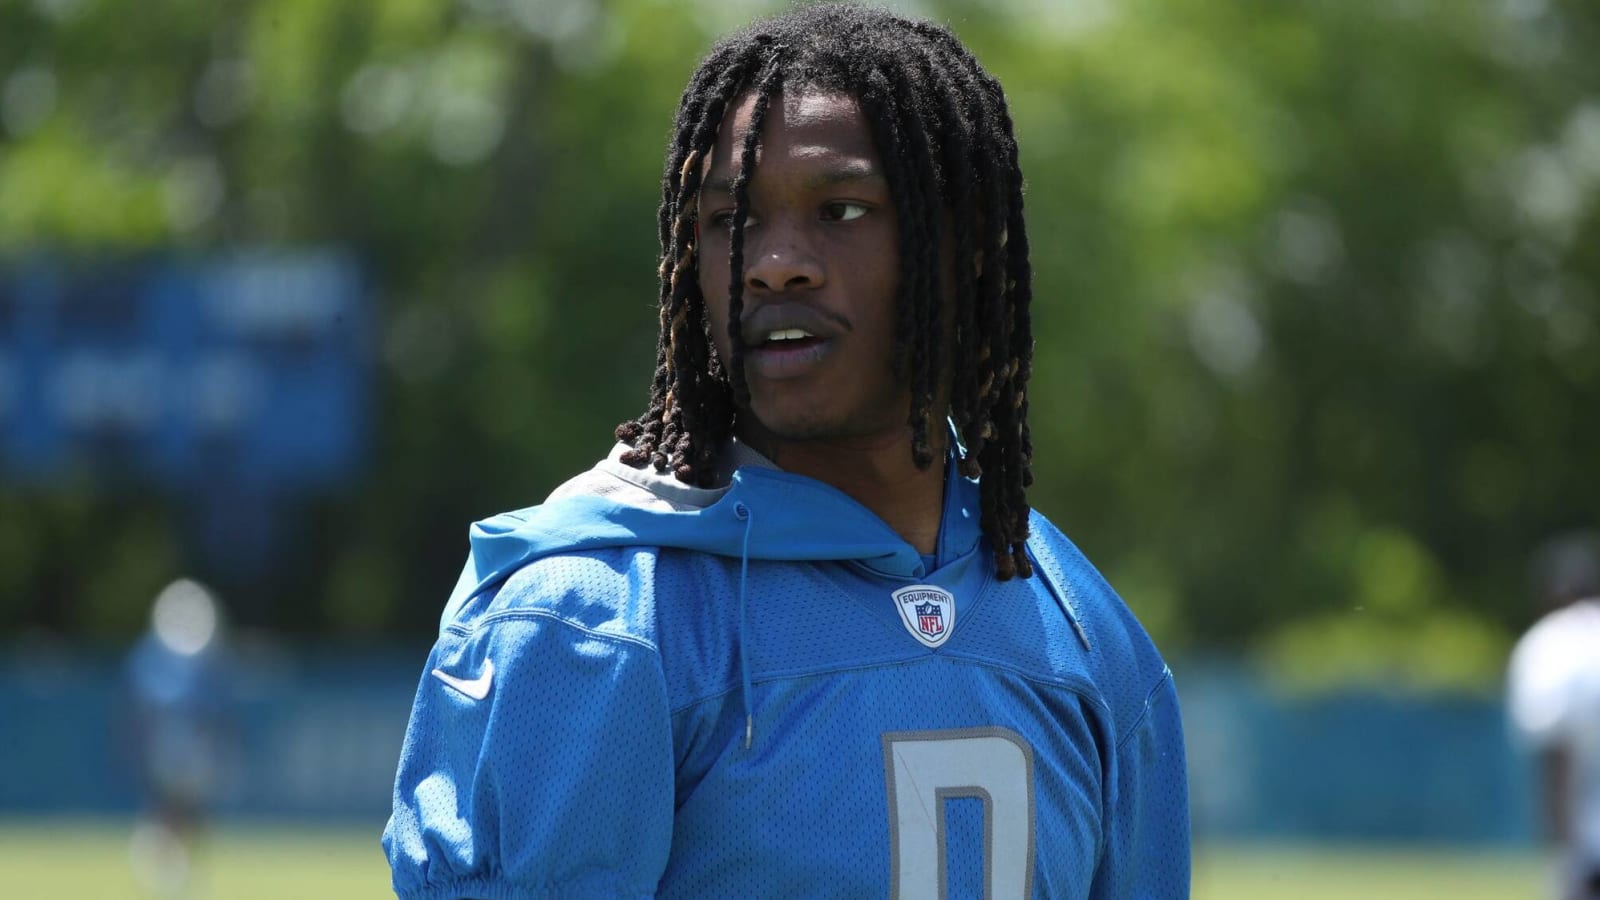 Lions coach talks mentoring suspended WR Jameson Williams